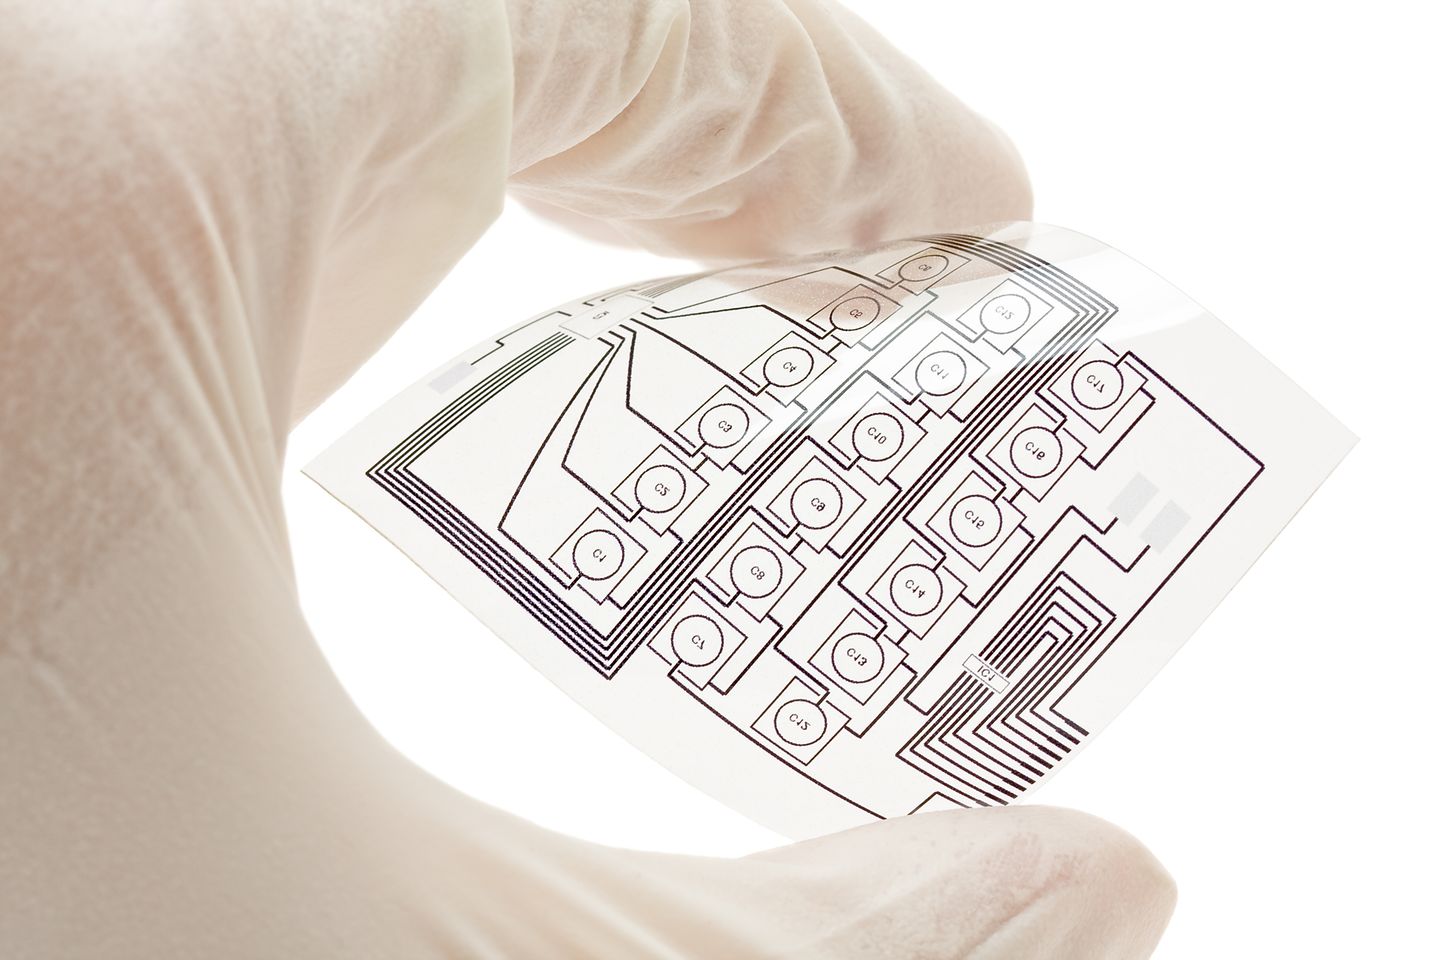 With highest levels of flexibility and efficiency, printed electronics makes new approaches in a variety of industries possible. 